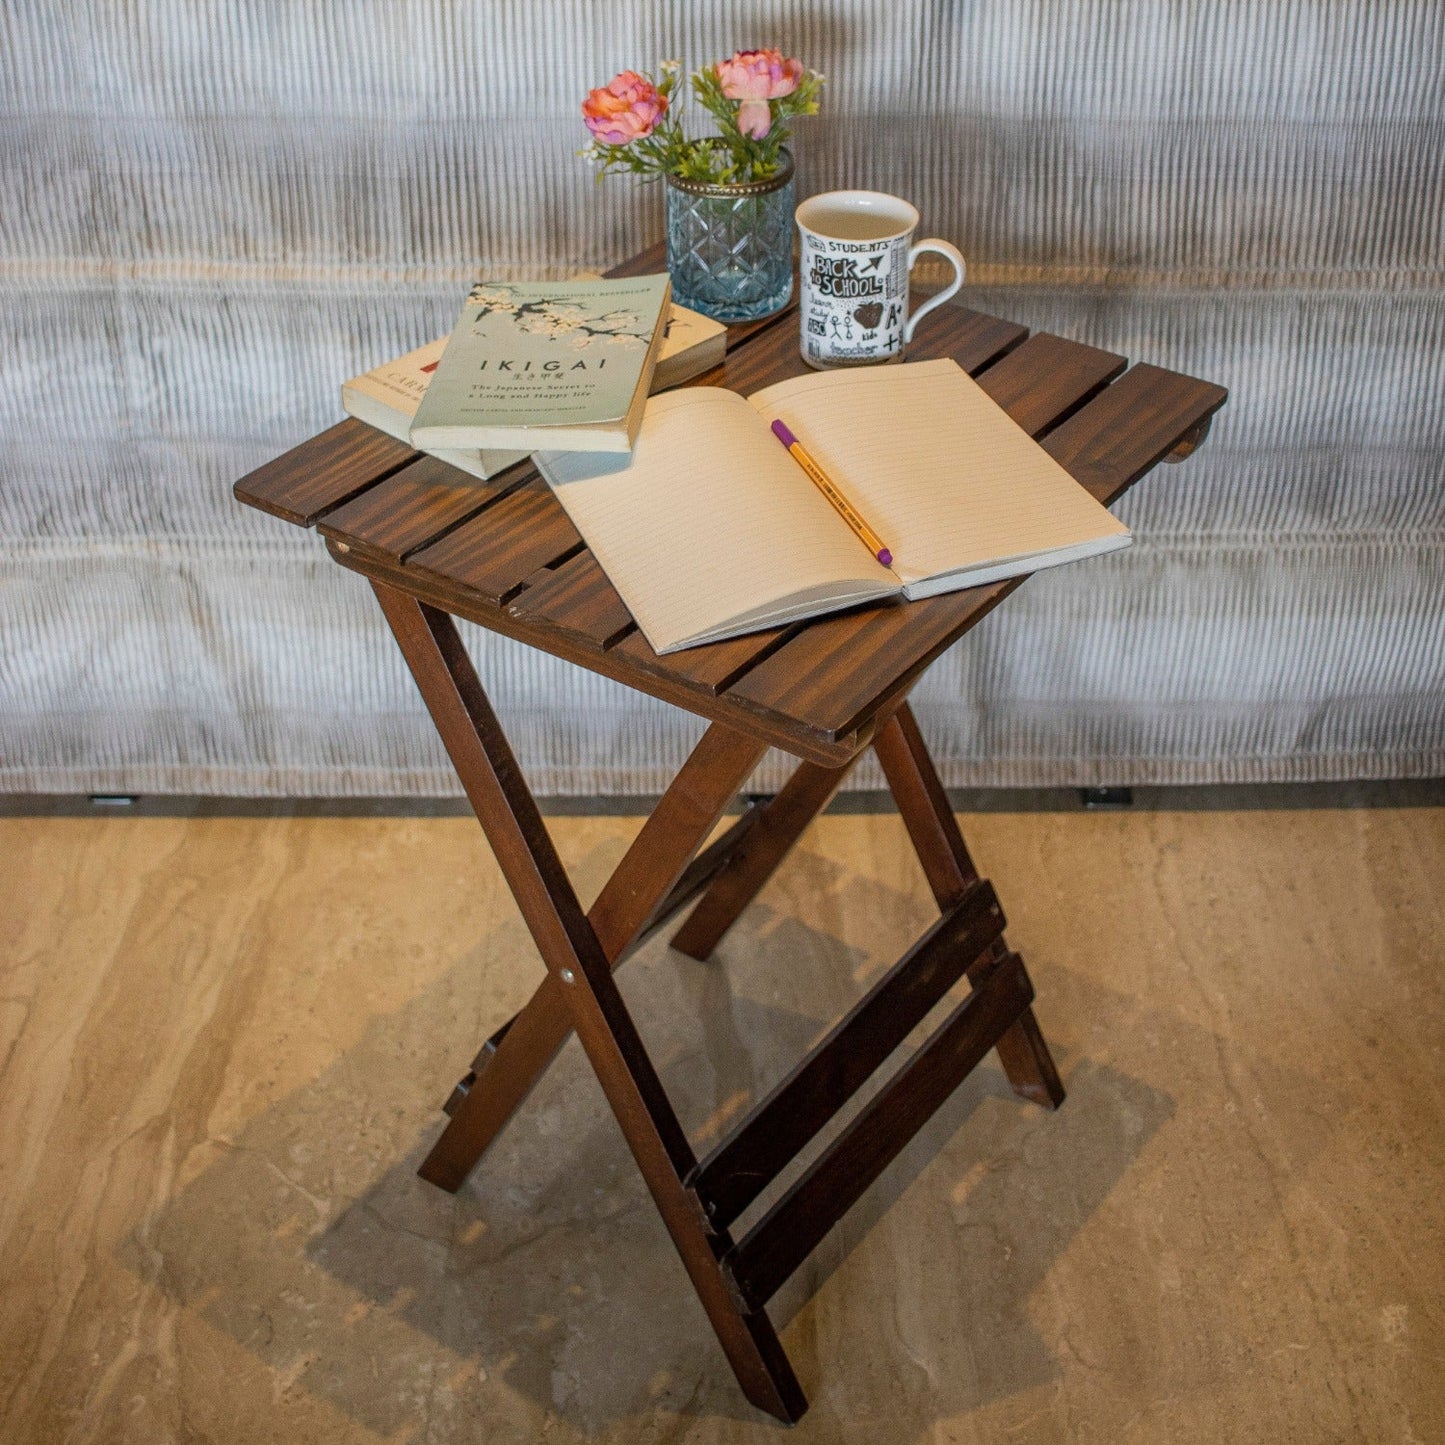 Shokale : Foldable Tables for your morning reading. - Ebony WoodcraftsFolding Tables, Side Tables, End Table